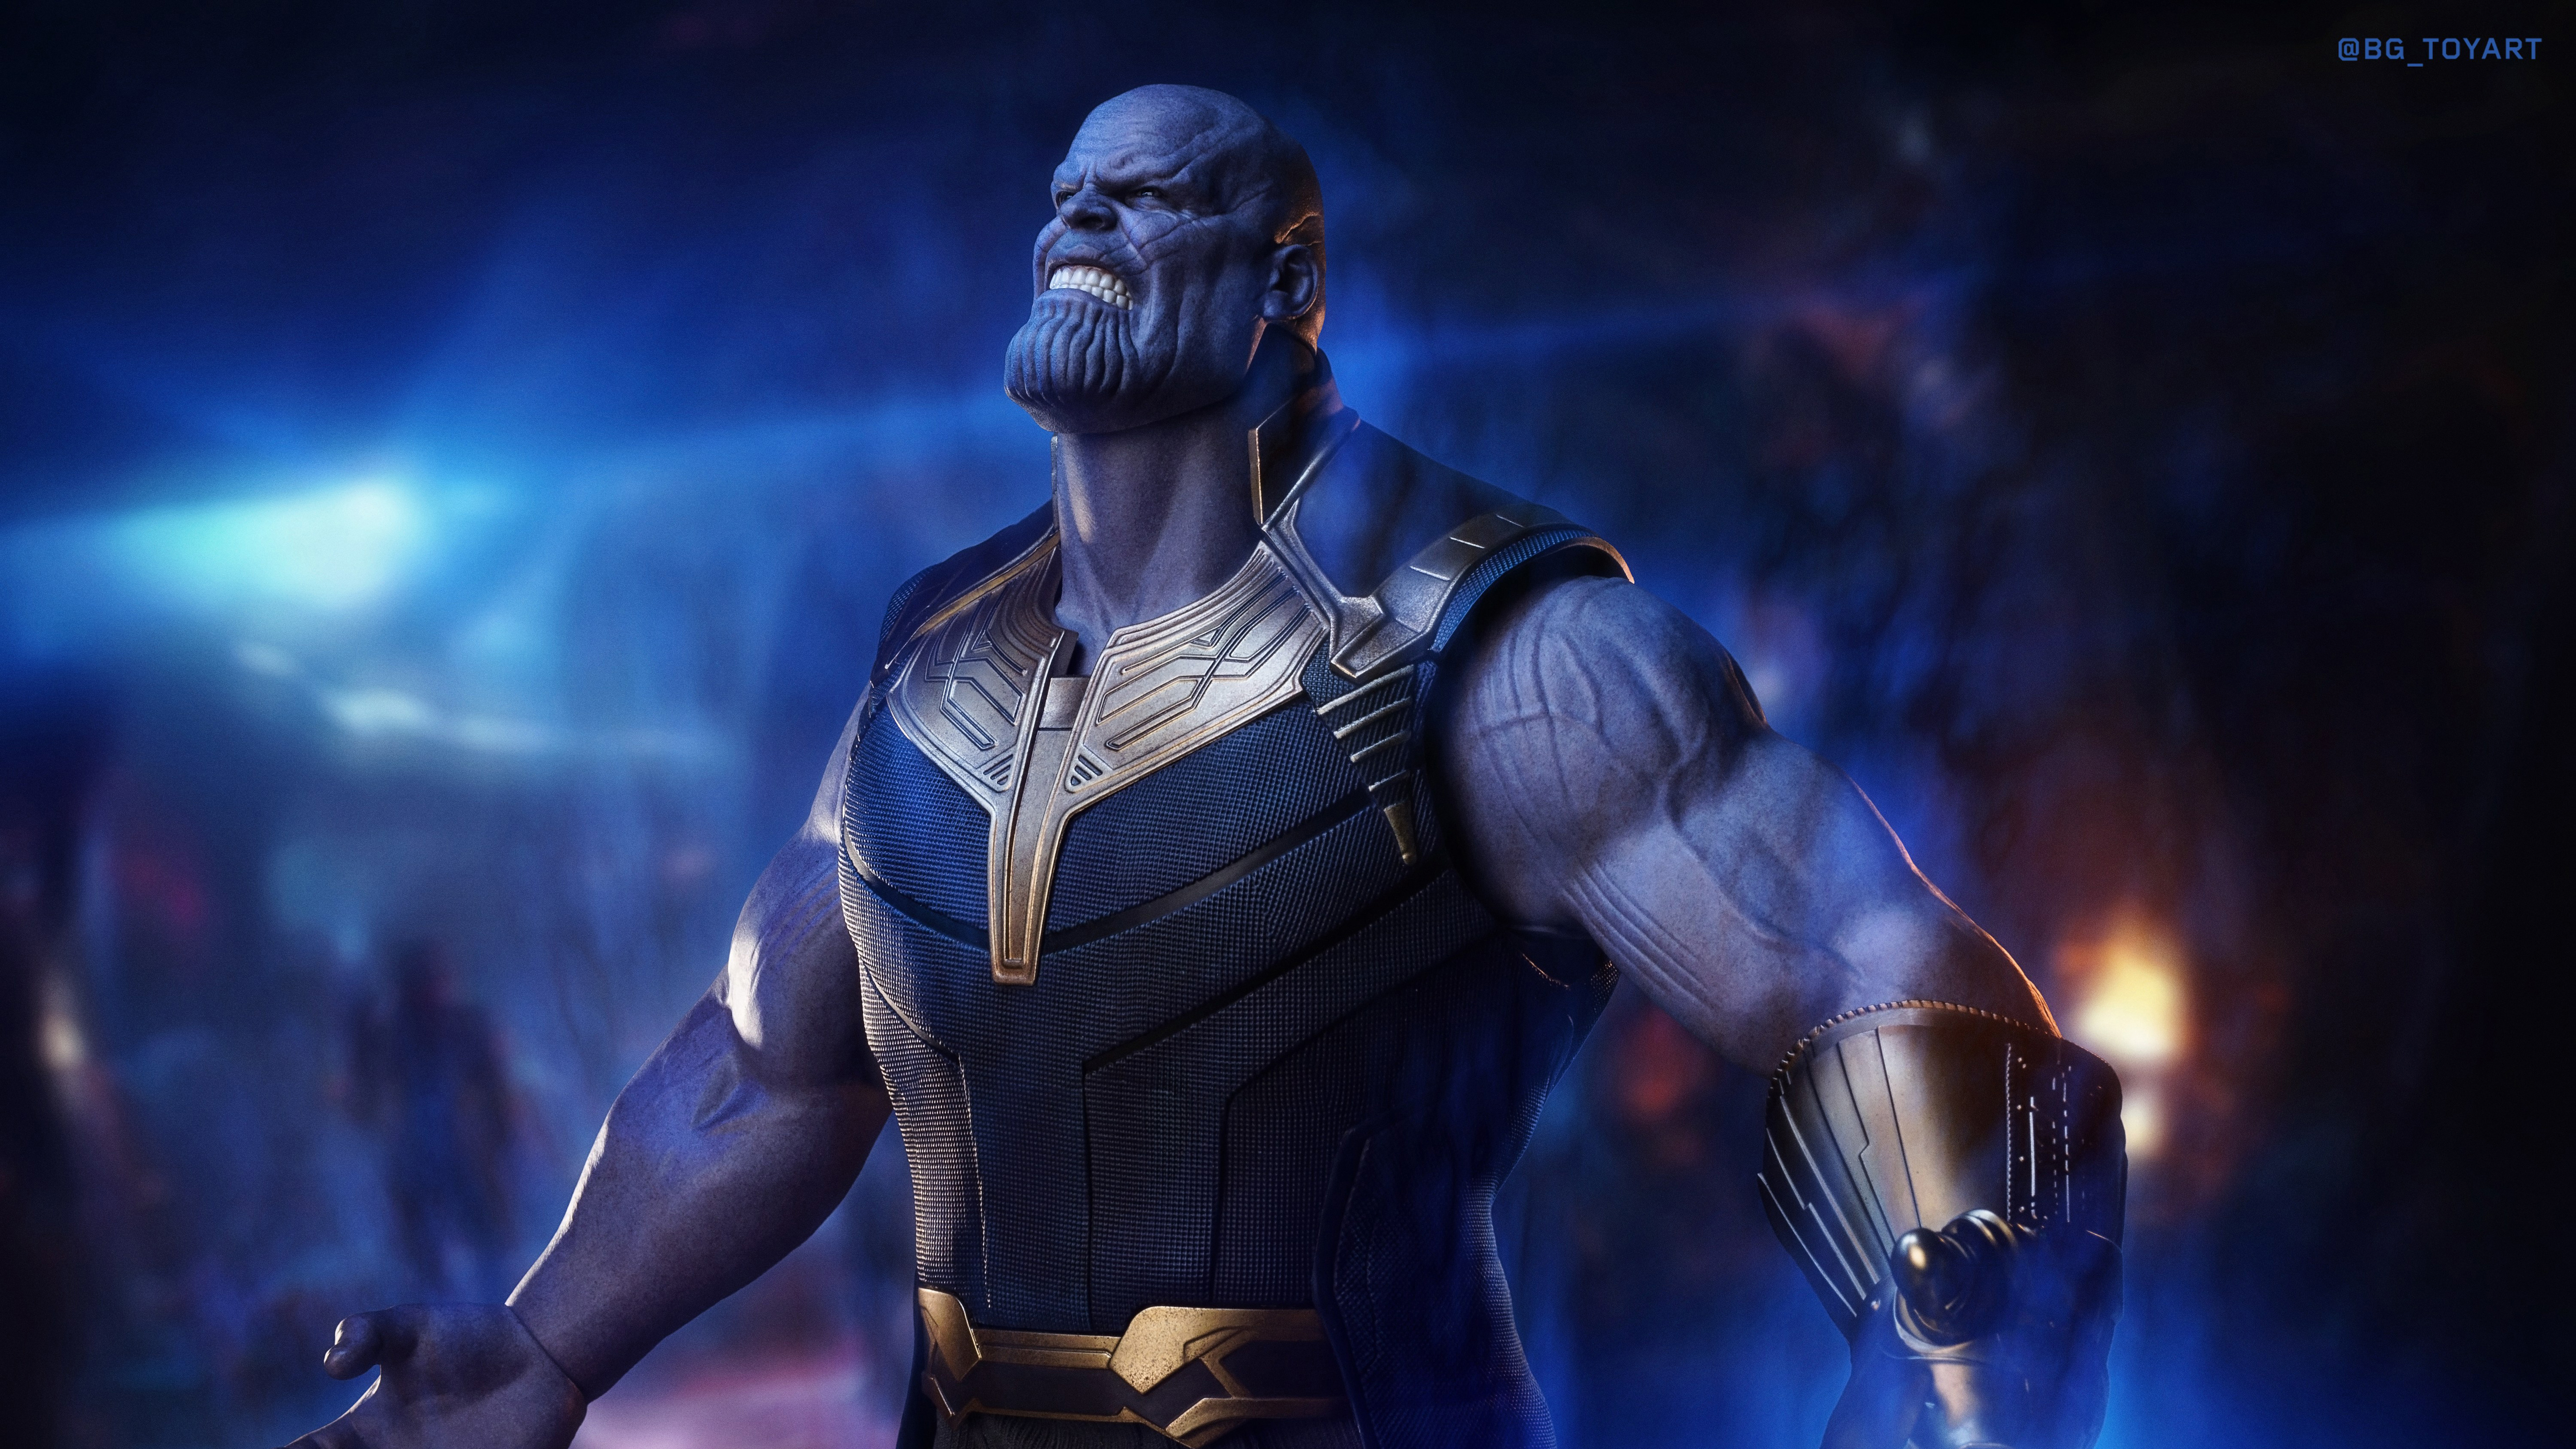 3840x21602021 Thanos in Infinity War 3840x21602021 Resolution Wallpaper, HD  Movies 4K Wallpapers, Images, Photos and Background - Wallpapers Den